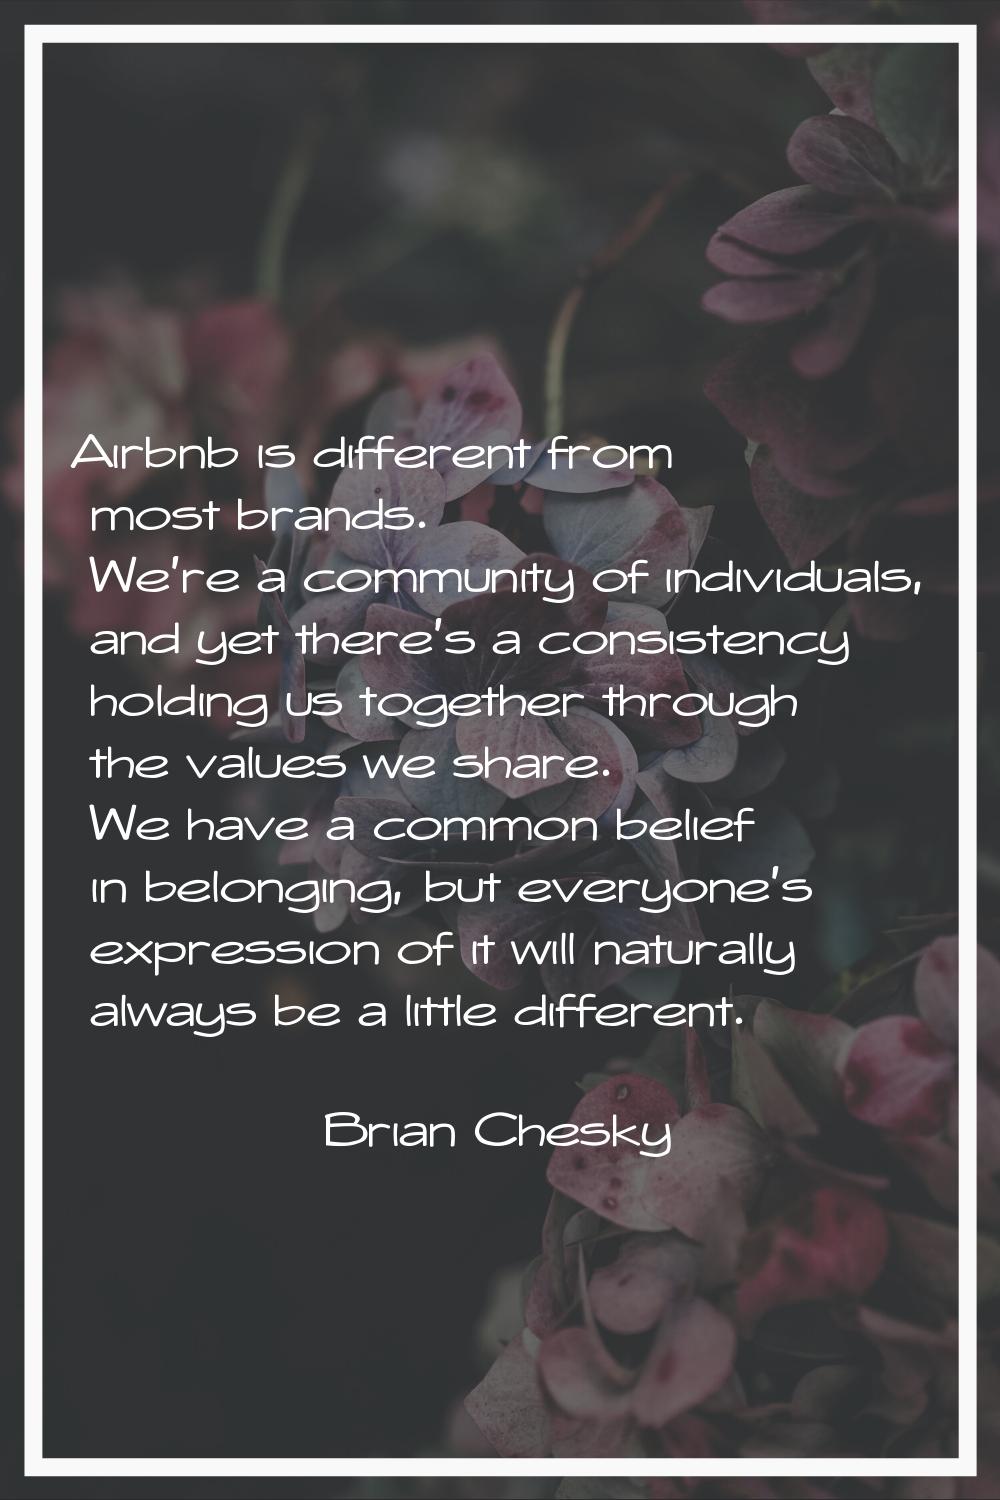 Airbnb is different from most brands. We're a community of individuals, and yet there's a consisten